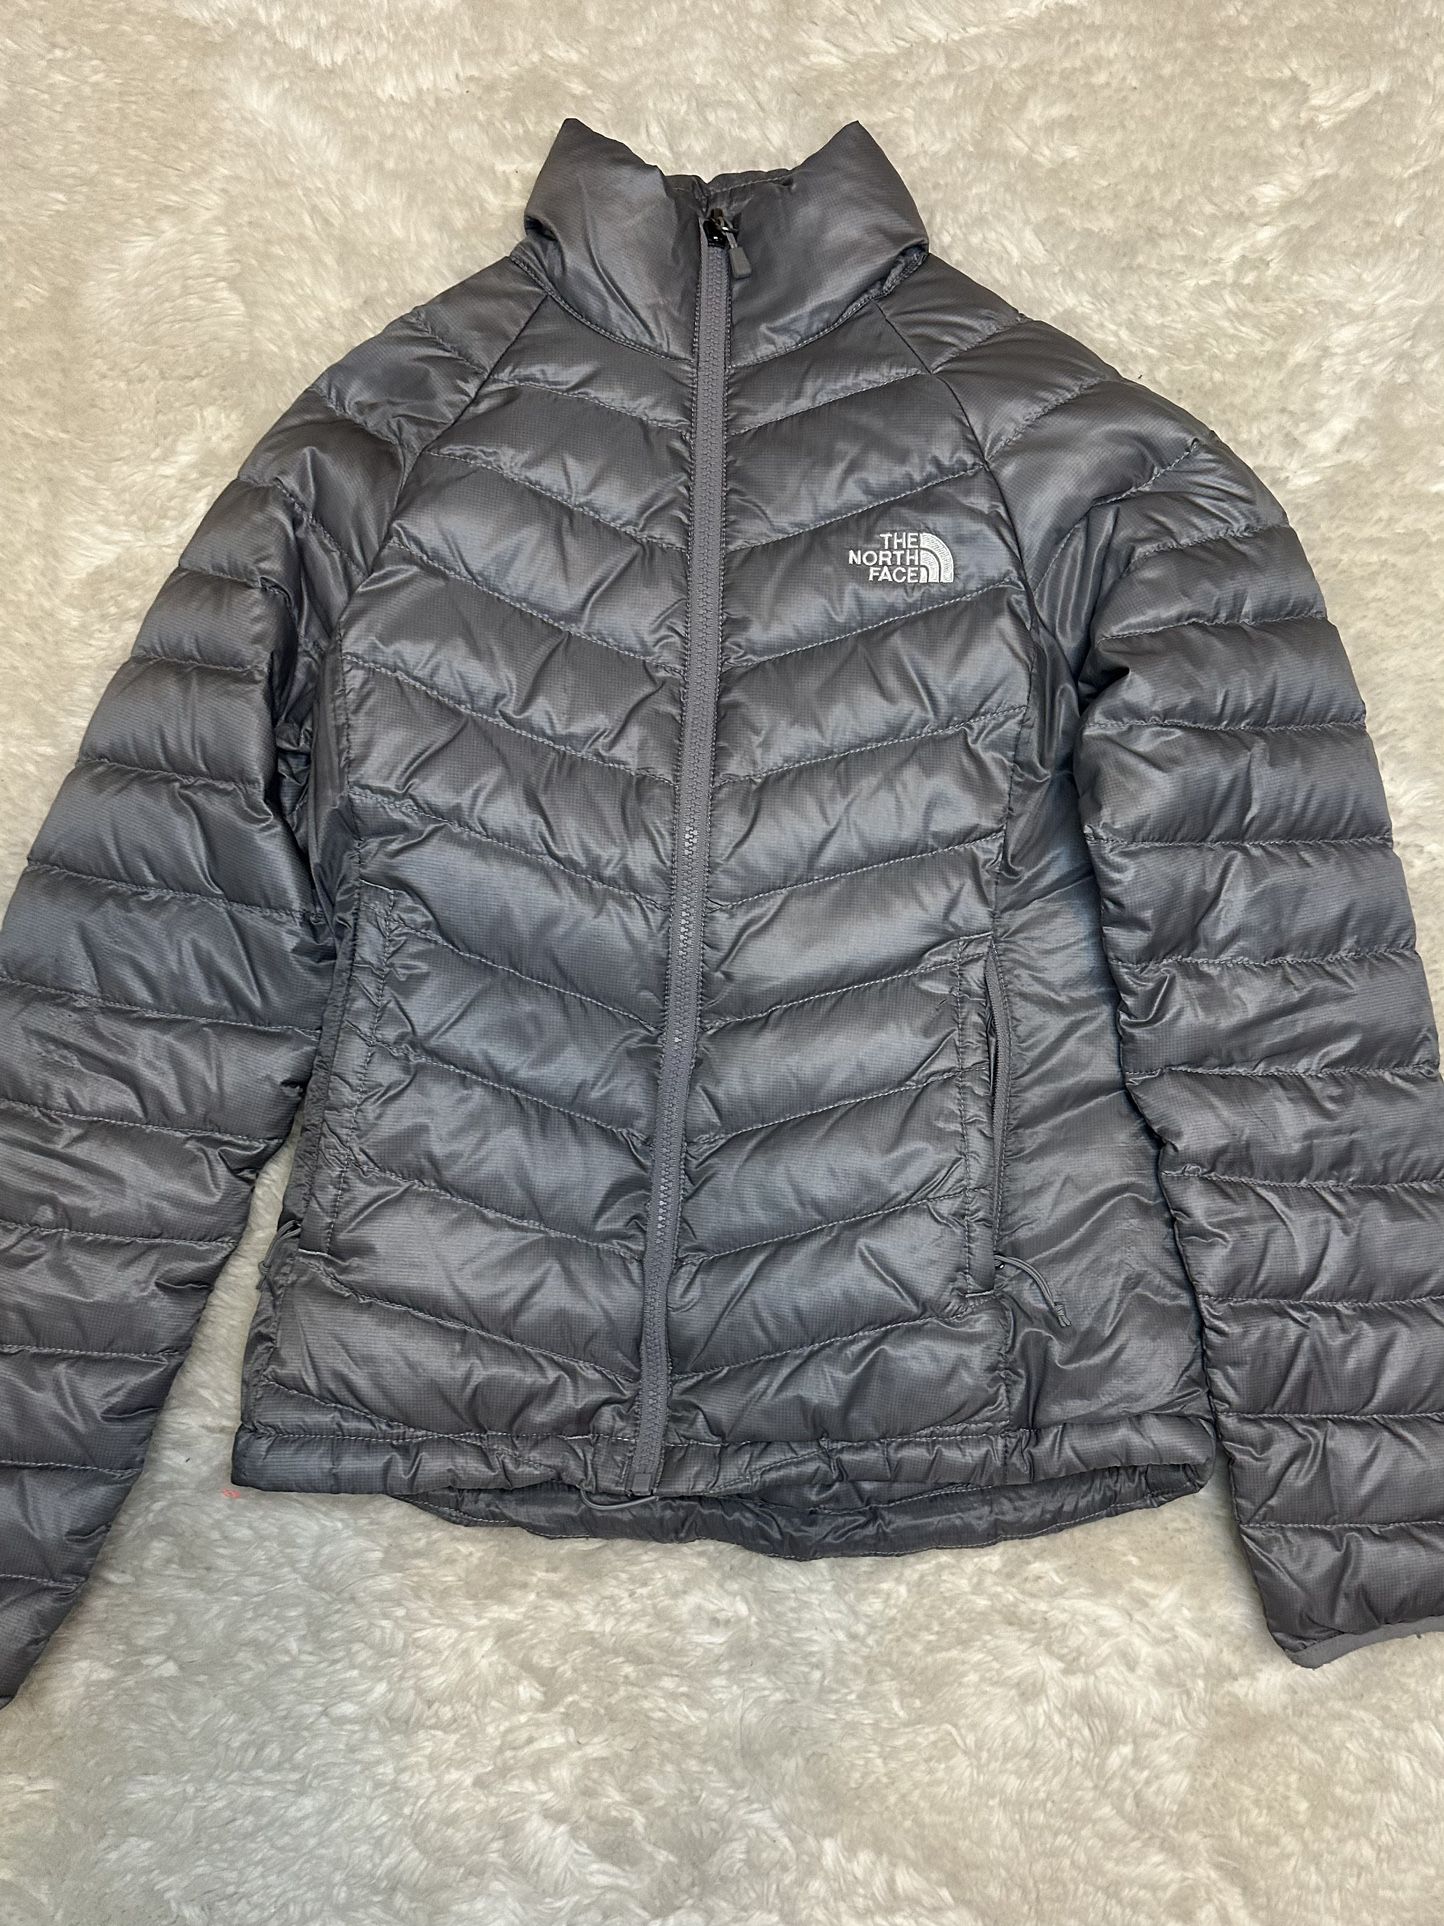 Womens North Face Jacket